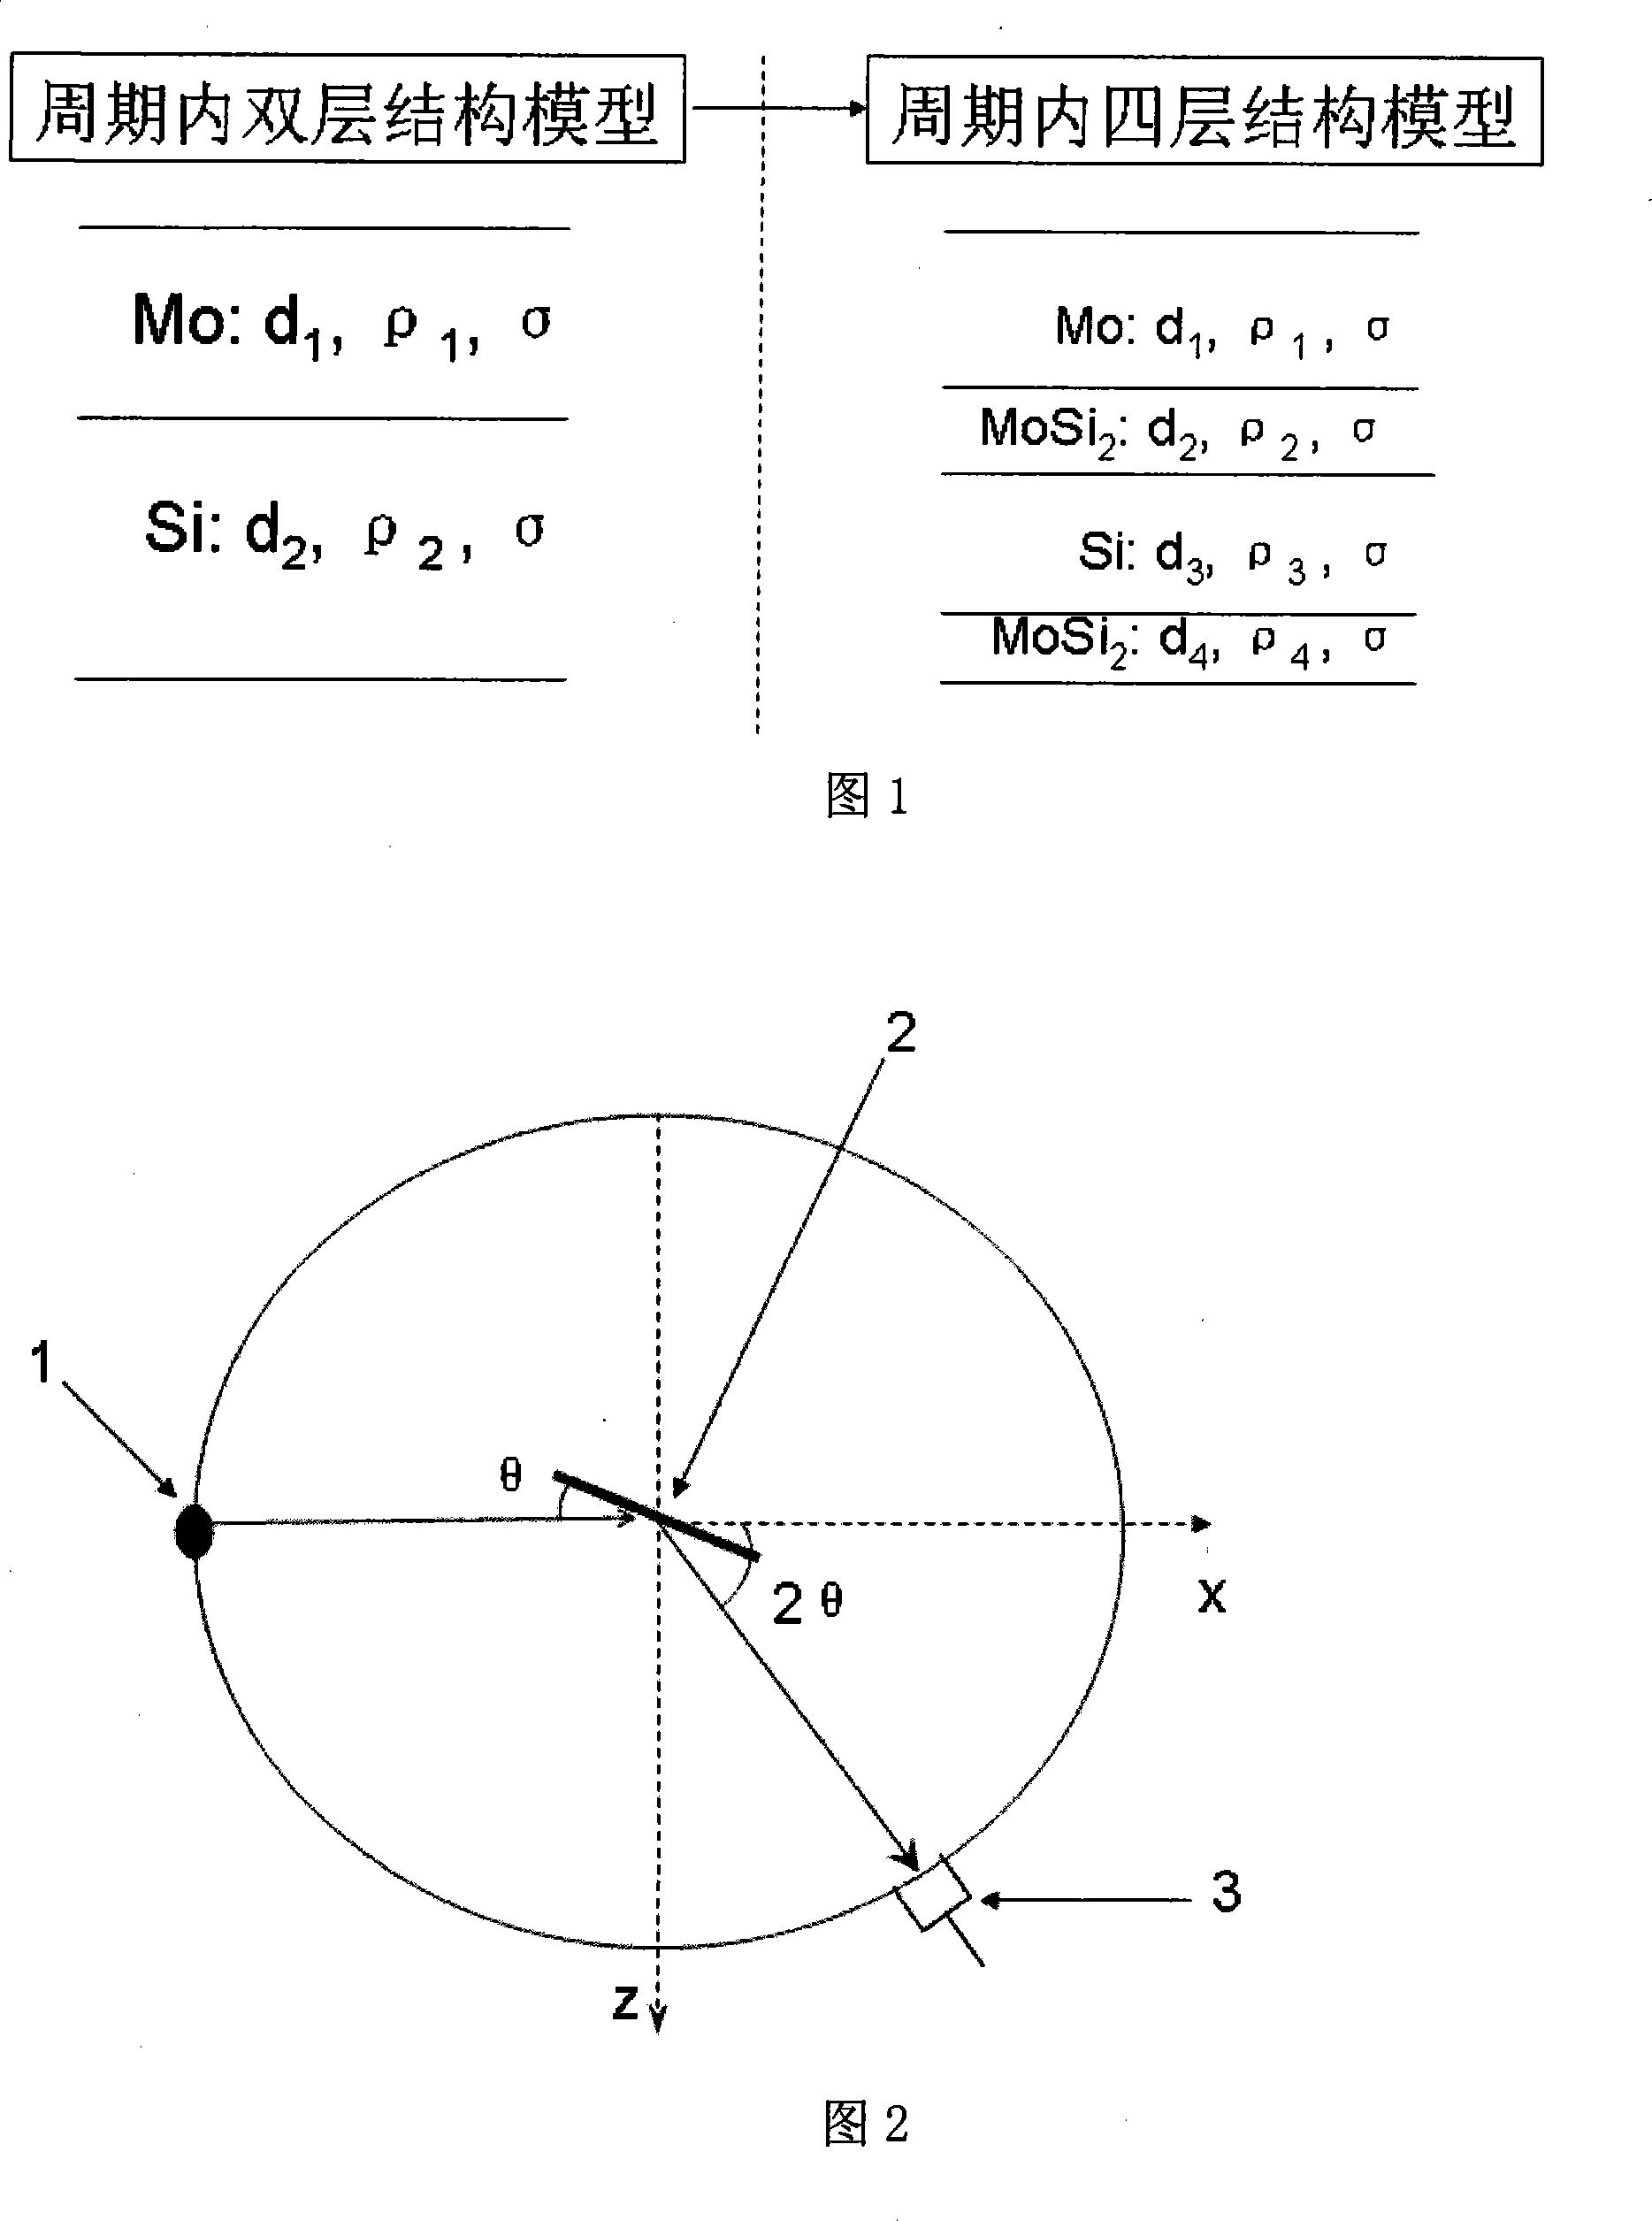 Method for measuring nano-scale multilayer film structure